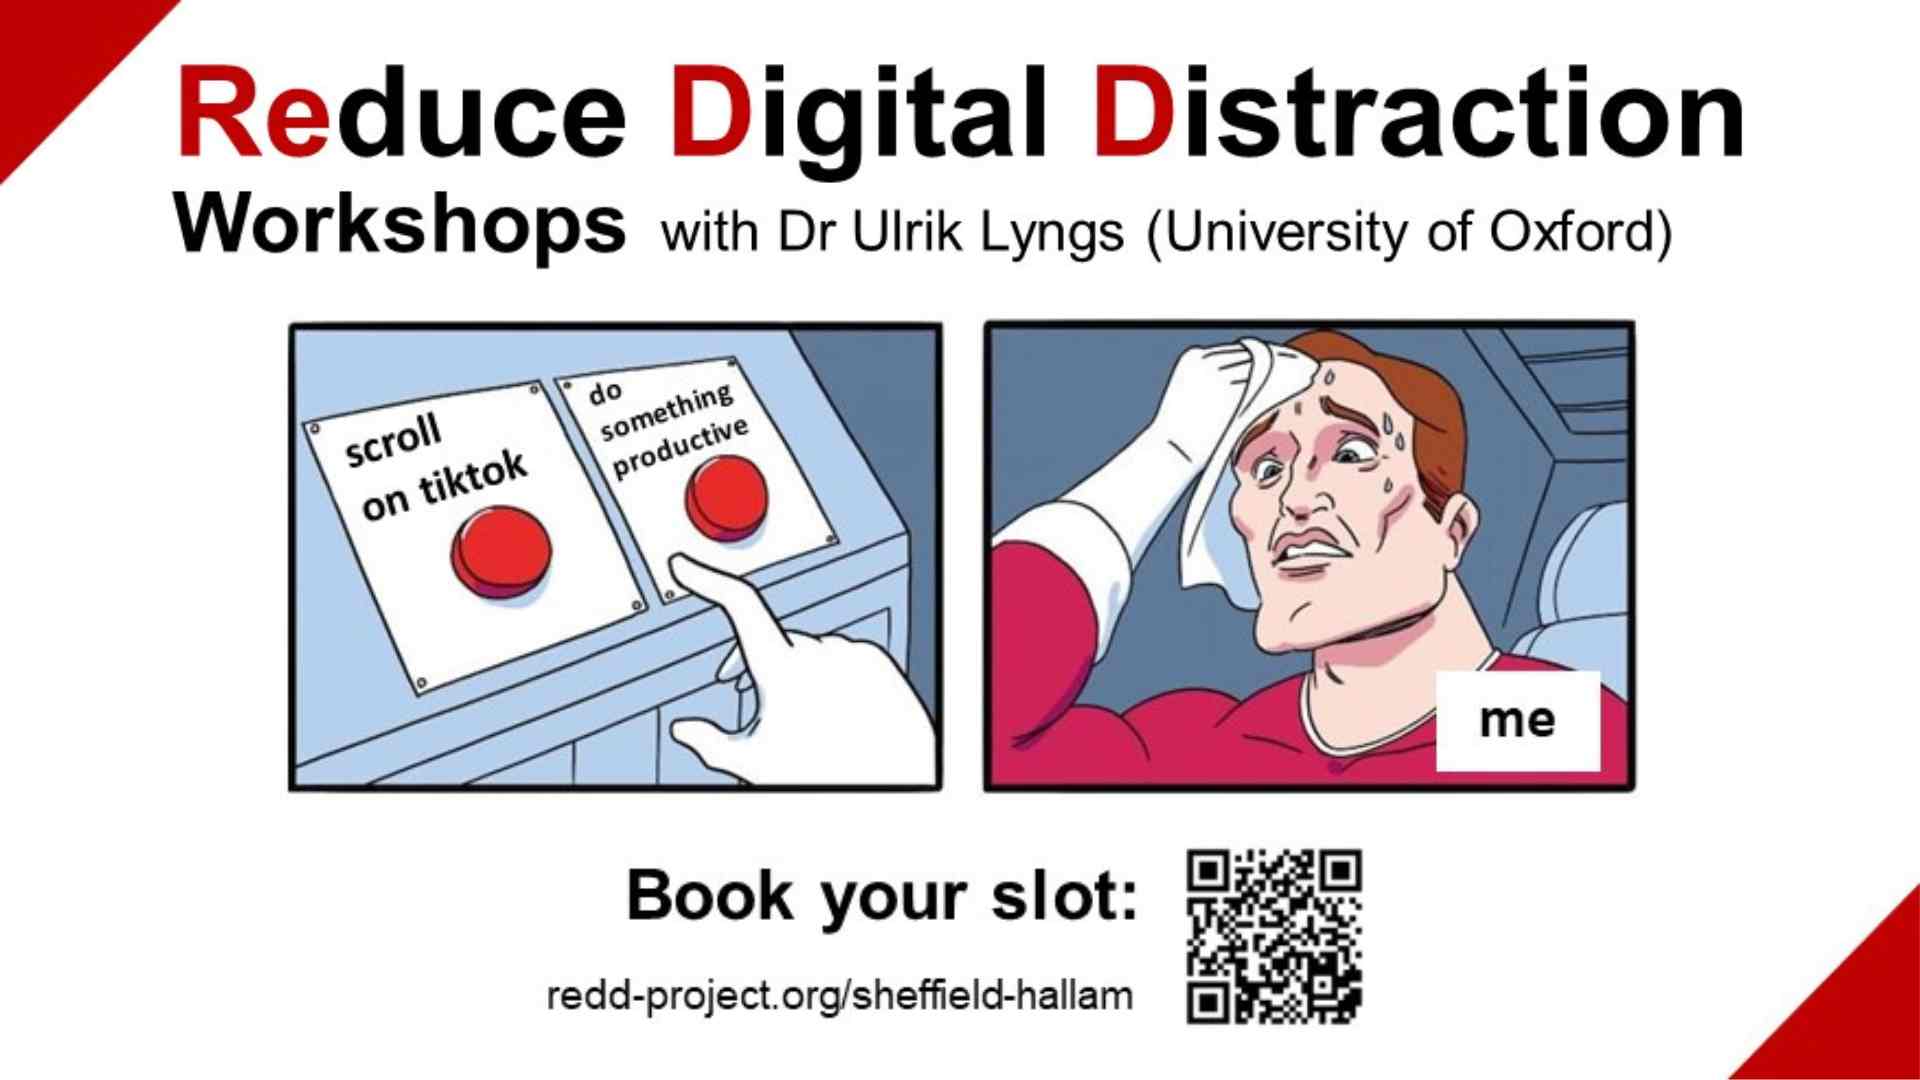 Reducing Digital Distraction workshops with Dr Ulrik Lyngs (University of Oxford). Book your slot with a QR code and the link https://redd-project.org/sheffield-hallam. The image depicts a person deciding weather to push a button labelled 'scroll on tiktok' or 'do something productive'